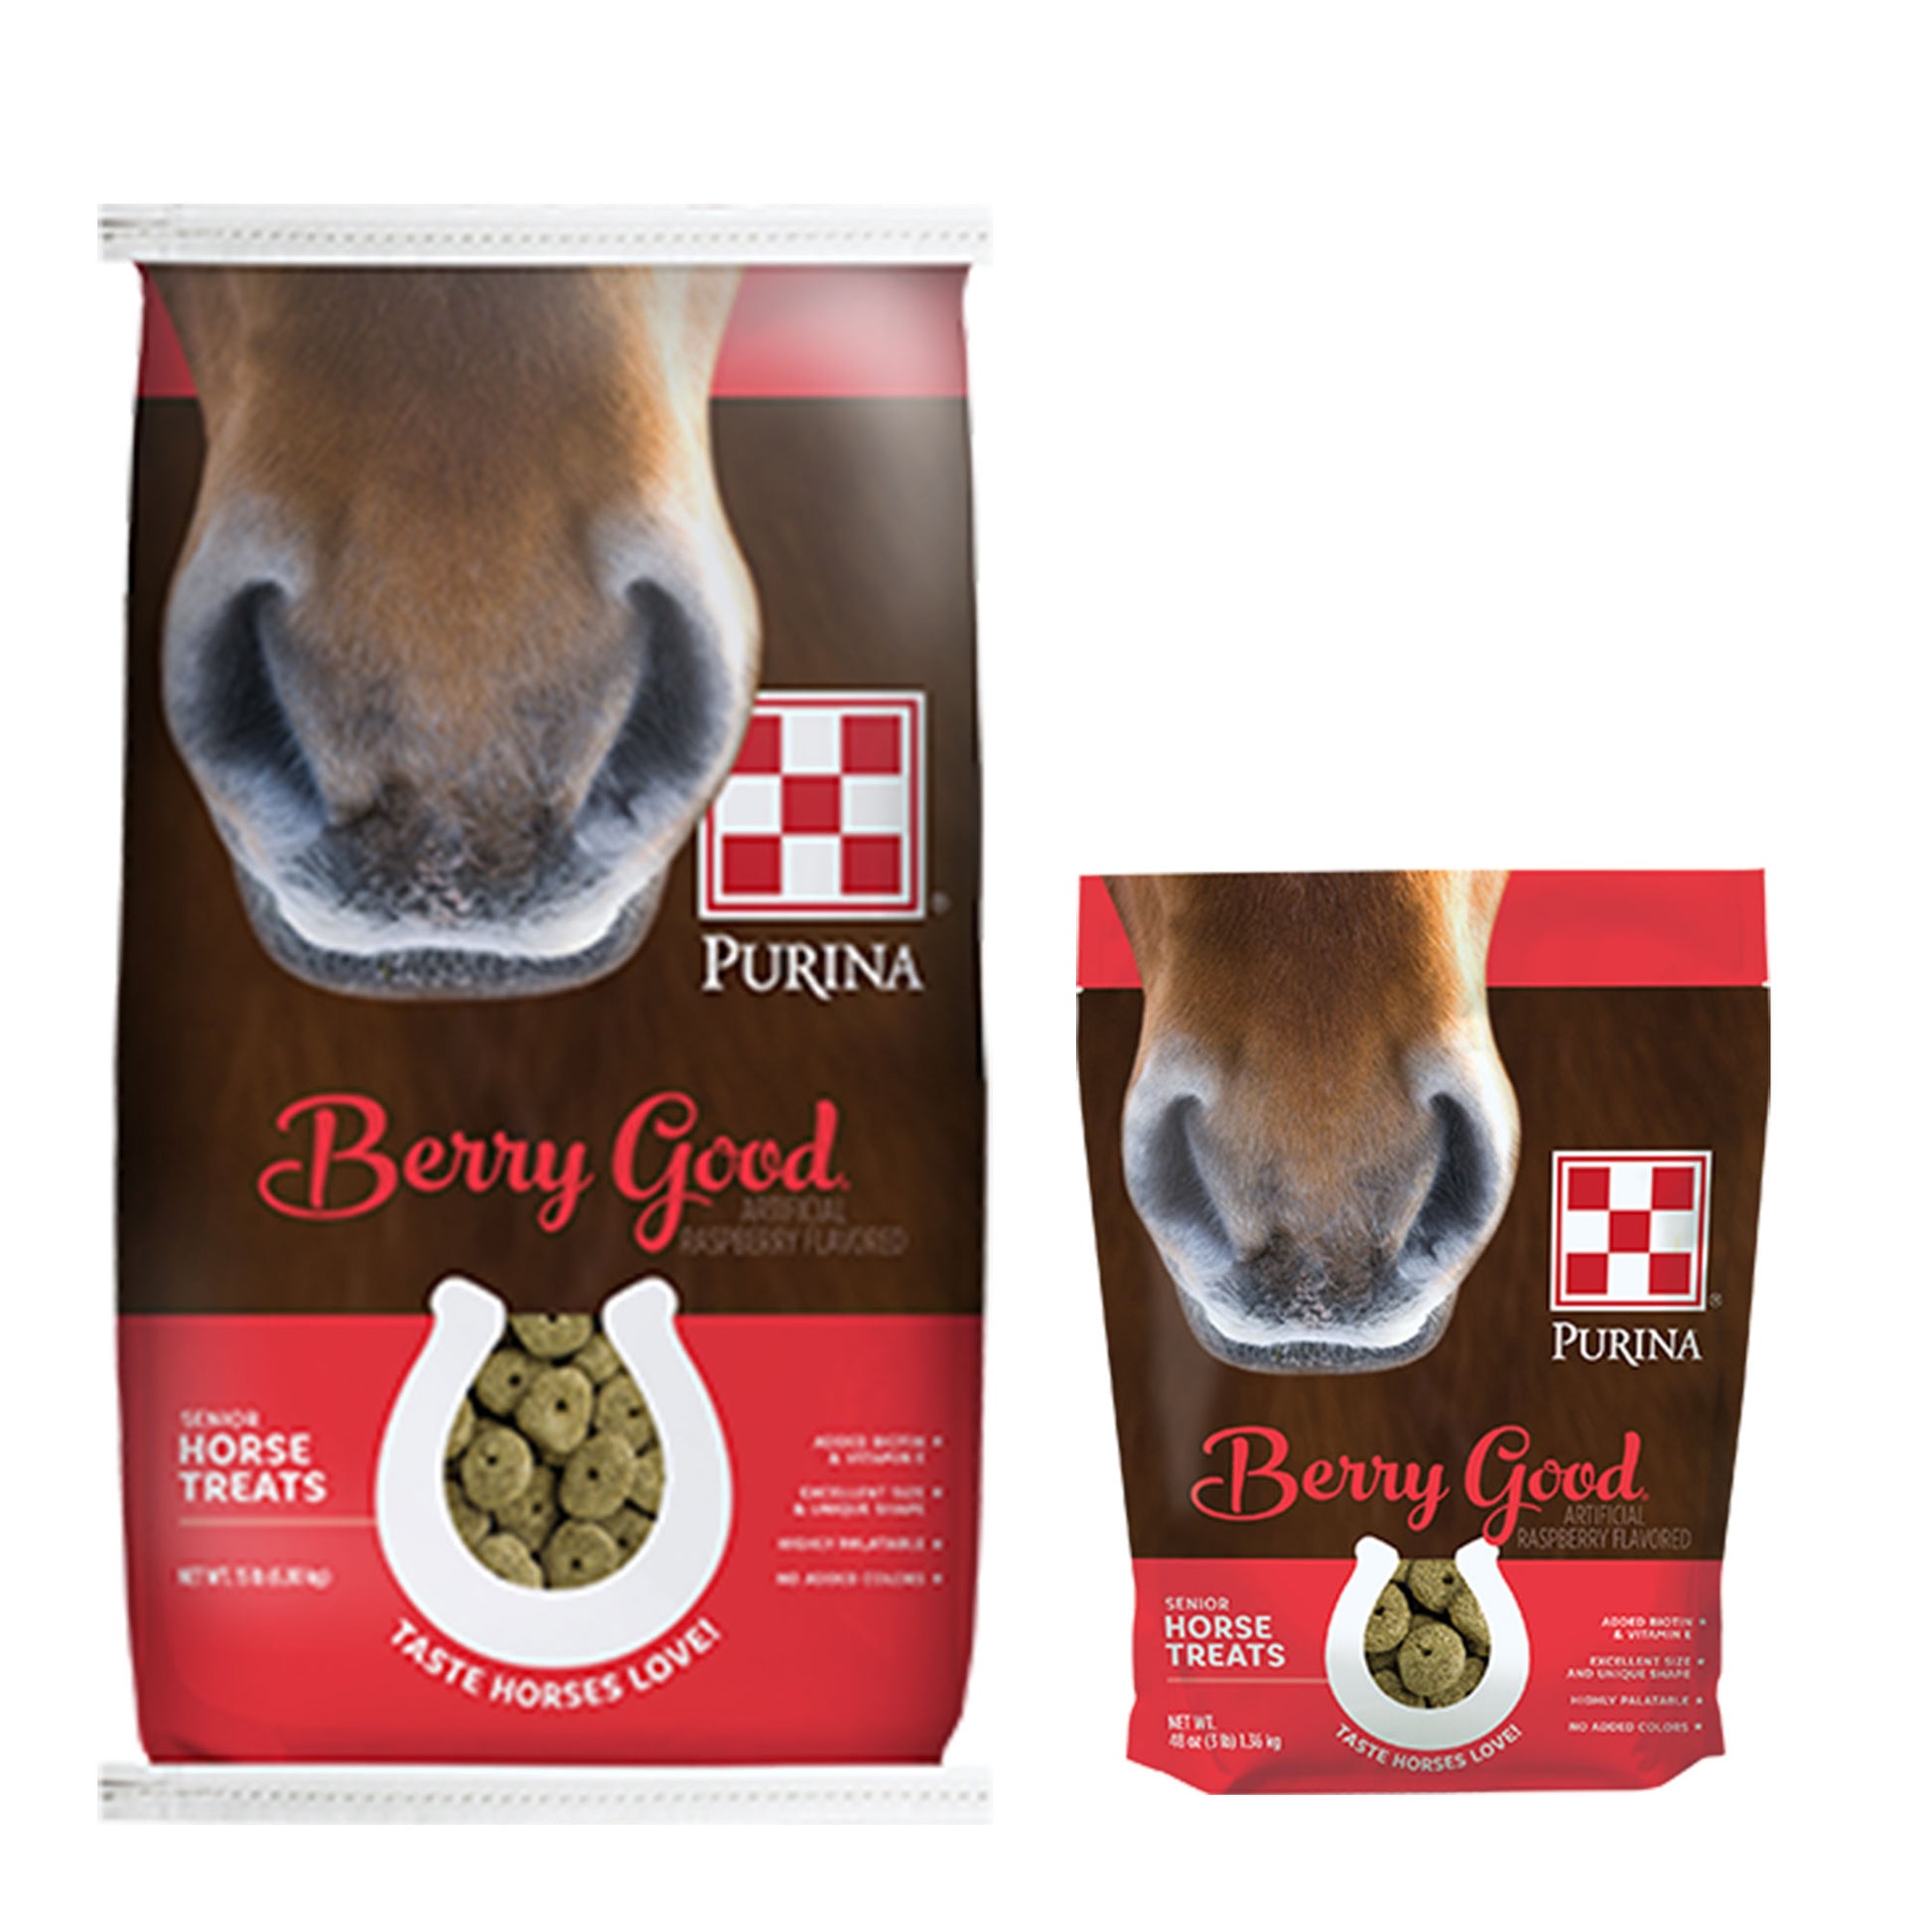 Purina Berry Good Horse treats 15 Pound & 3 Pound together